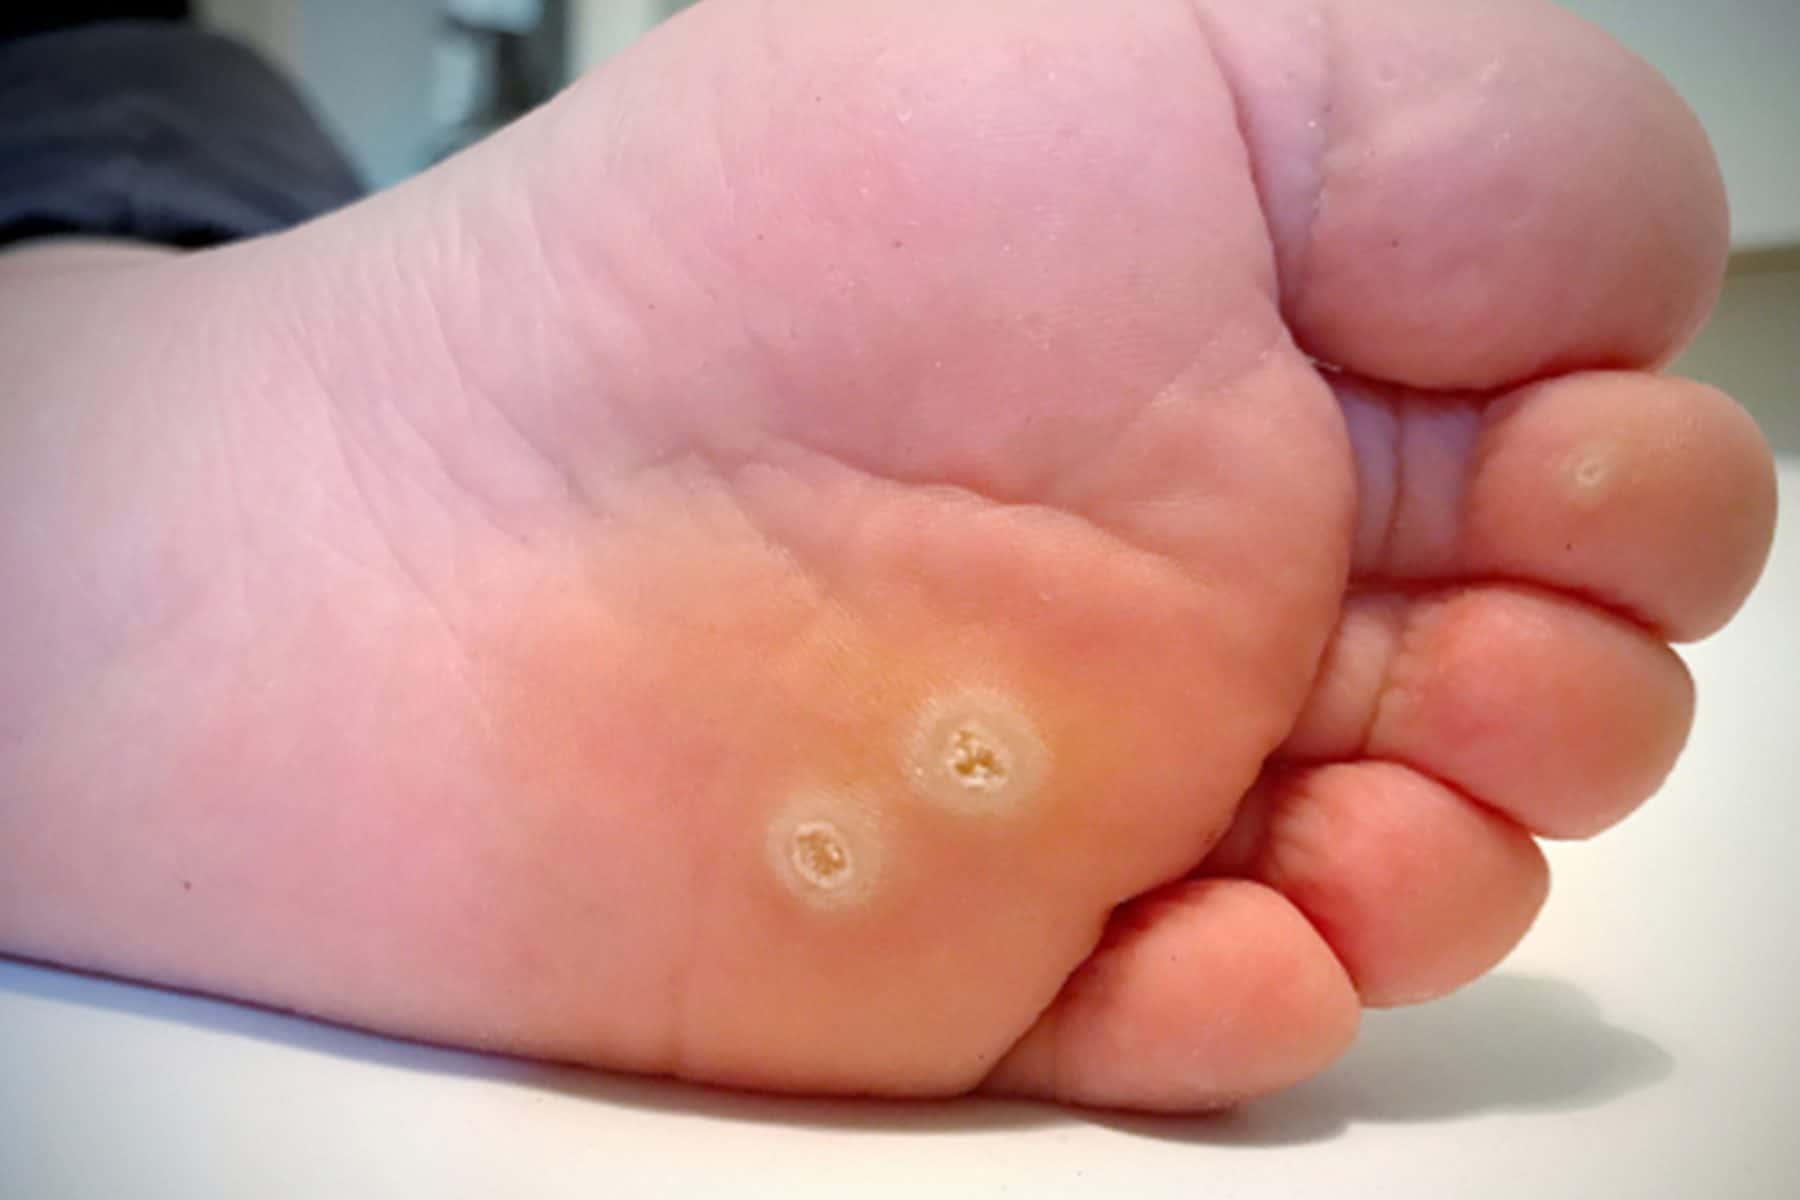 wart on a foot